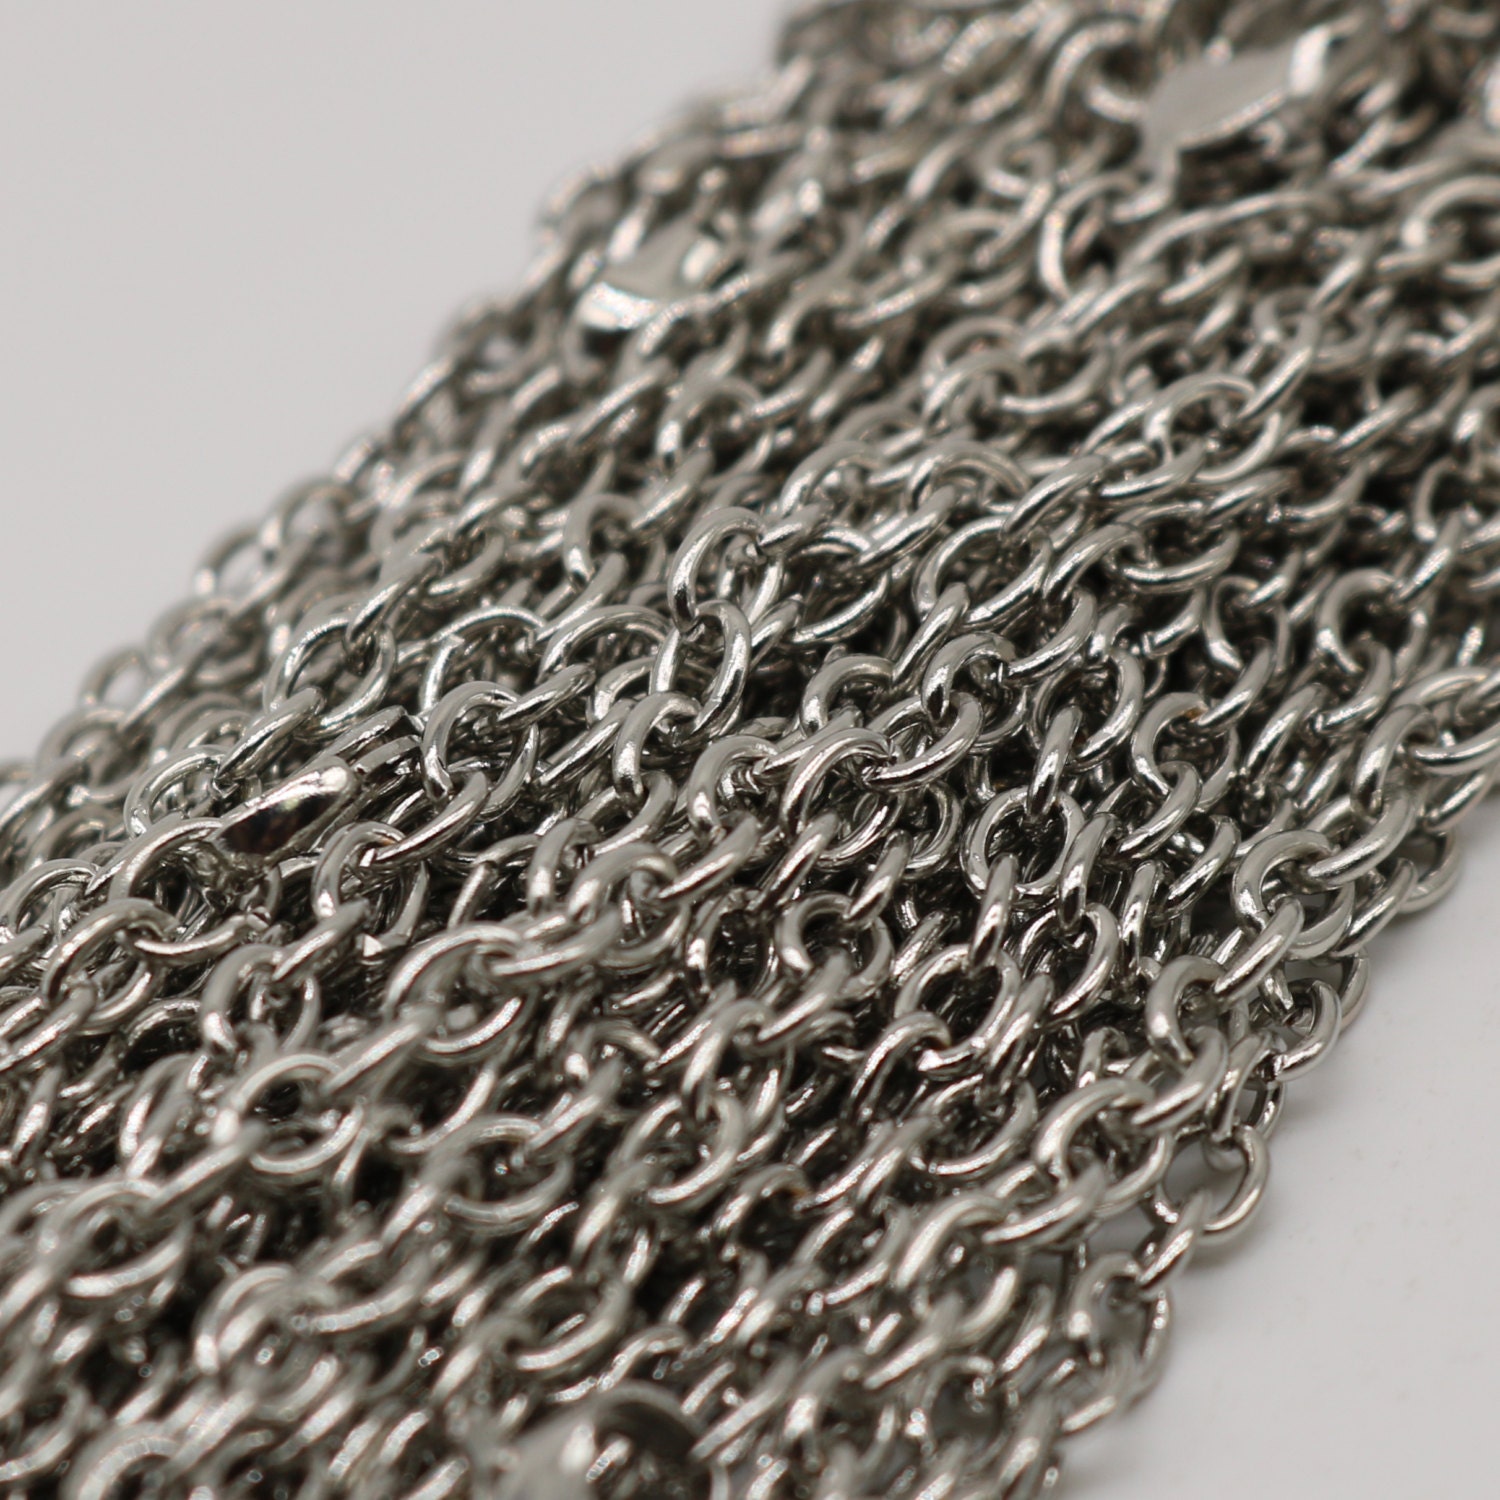 Stainless Steel Chain Bulk, 10ft Spool of Surgical Stainless Steel 316L  Sturdy Tiny Curb Chain 1.45mm Soldered Link 